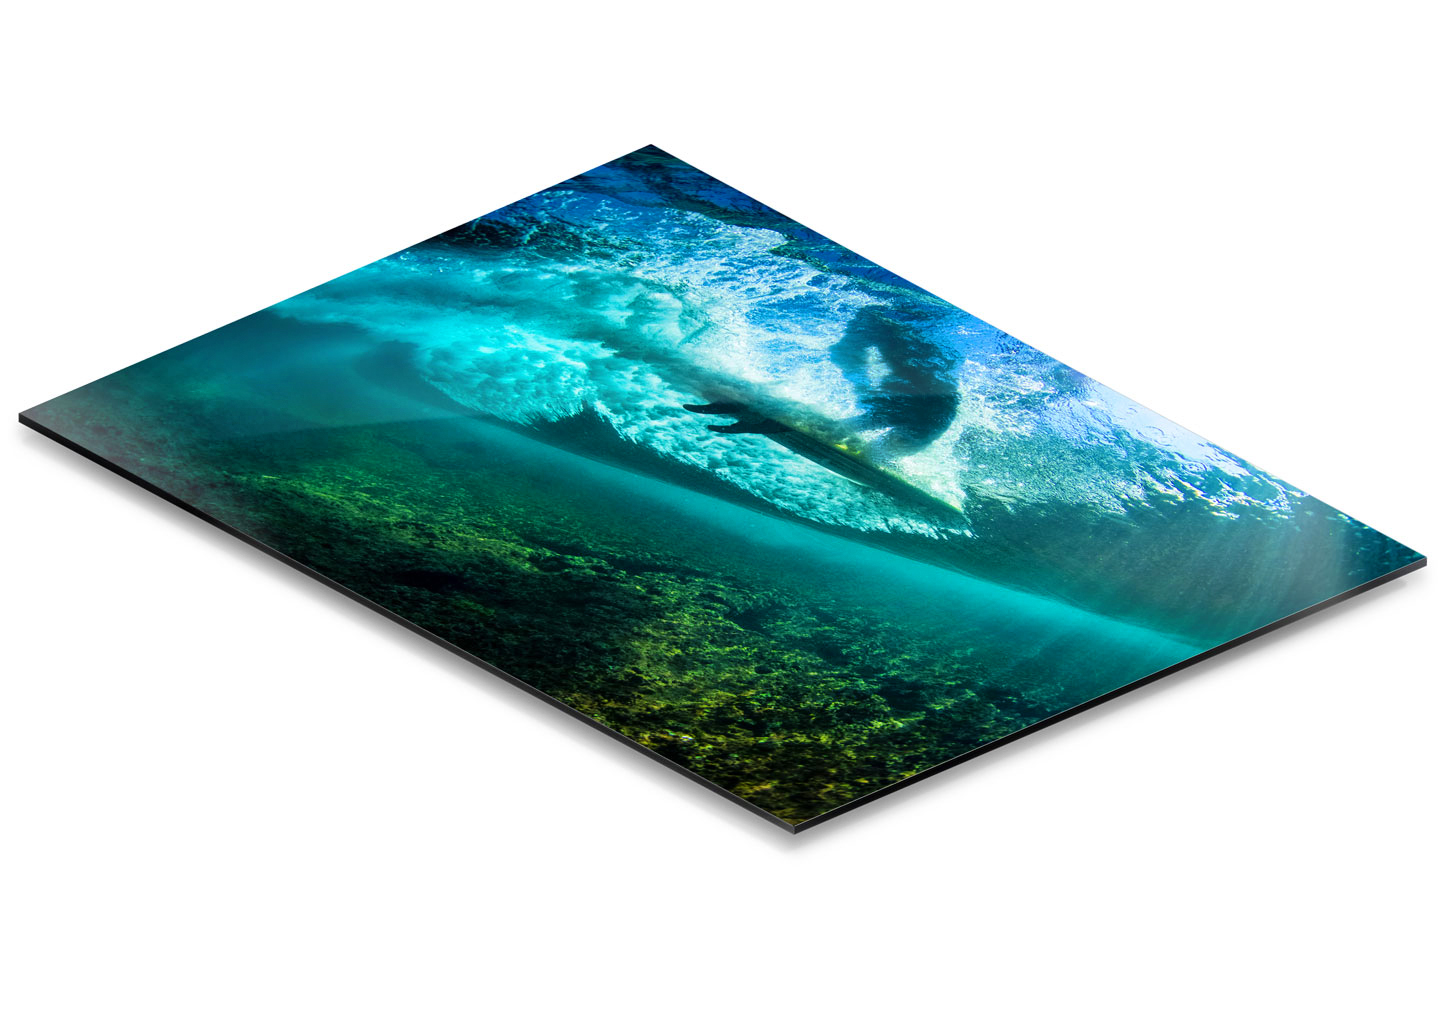 Epic Prints are high resolution photographic prints mounted on an aluminum substrate and finished with a thick laminate.